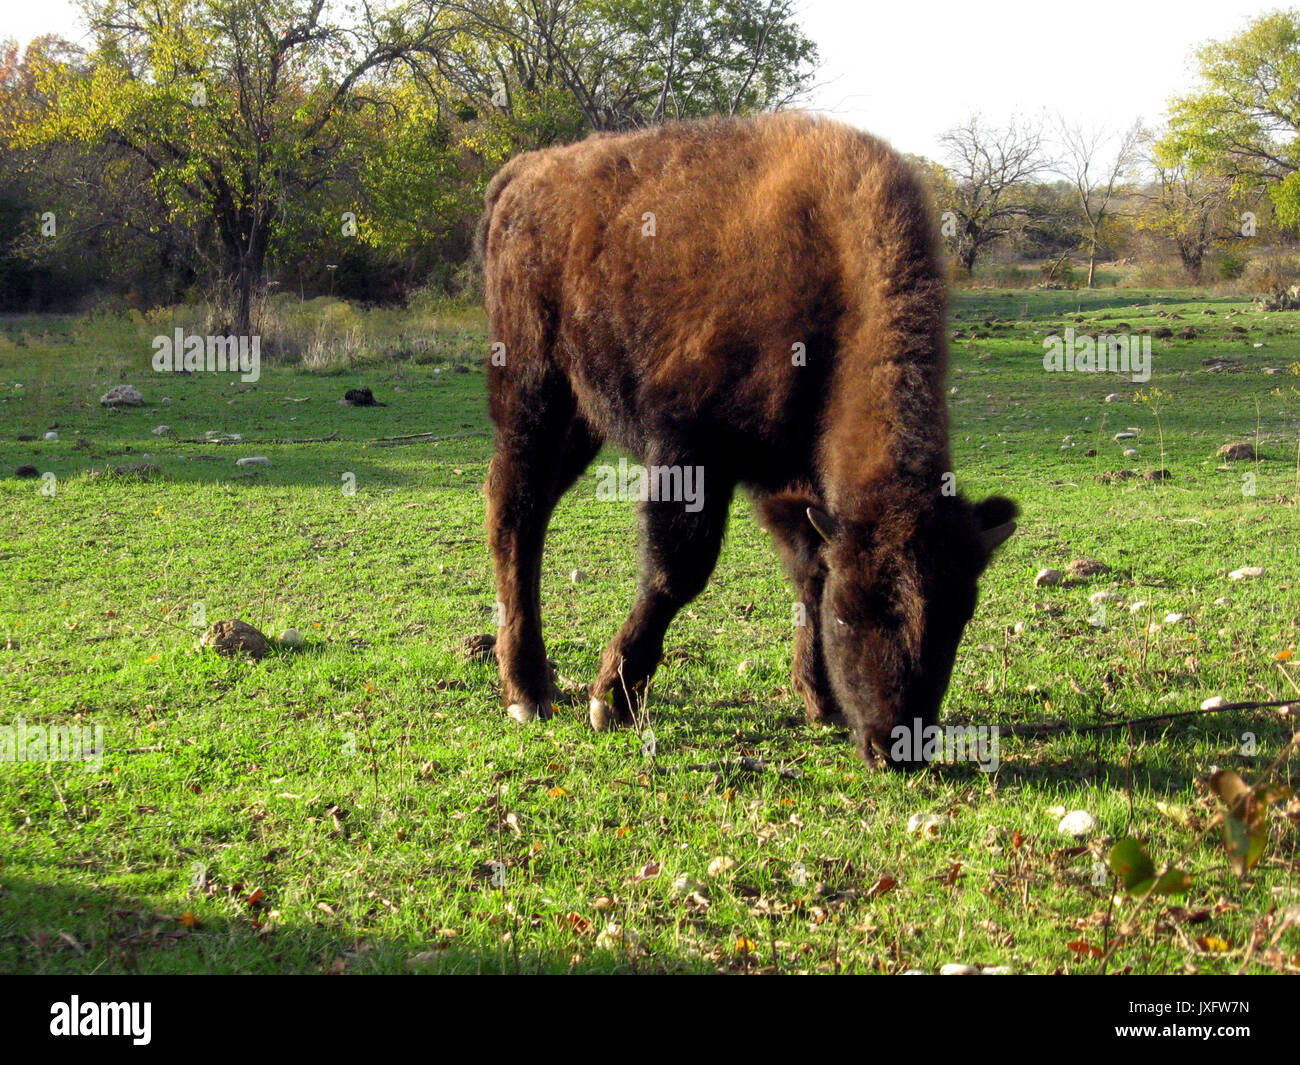 A young bison grazes in green pasture at Chickasaw National Recreation Area in Sulphur Oklahoma. Stock Photo